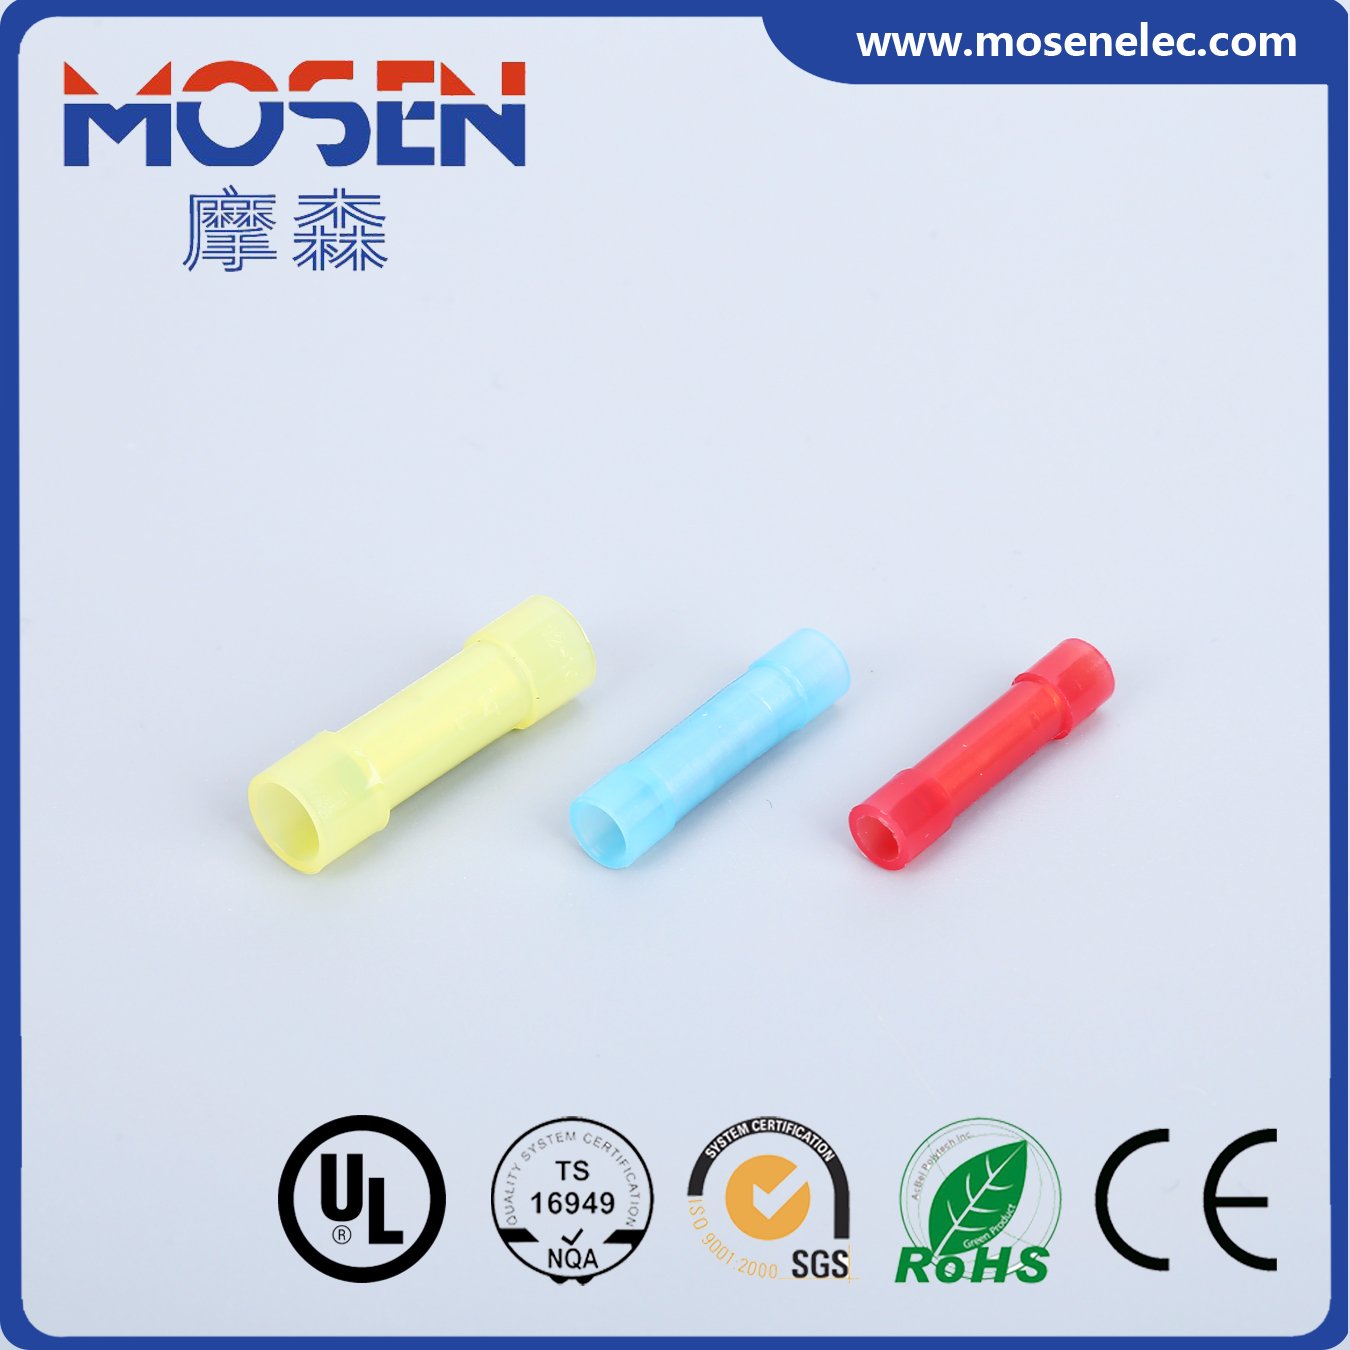 Bnw Type Nylon Insulated Multilink Butt Splice Connector 